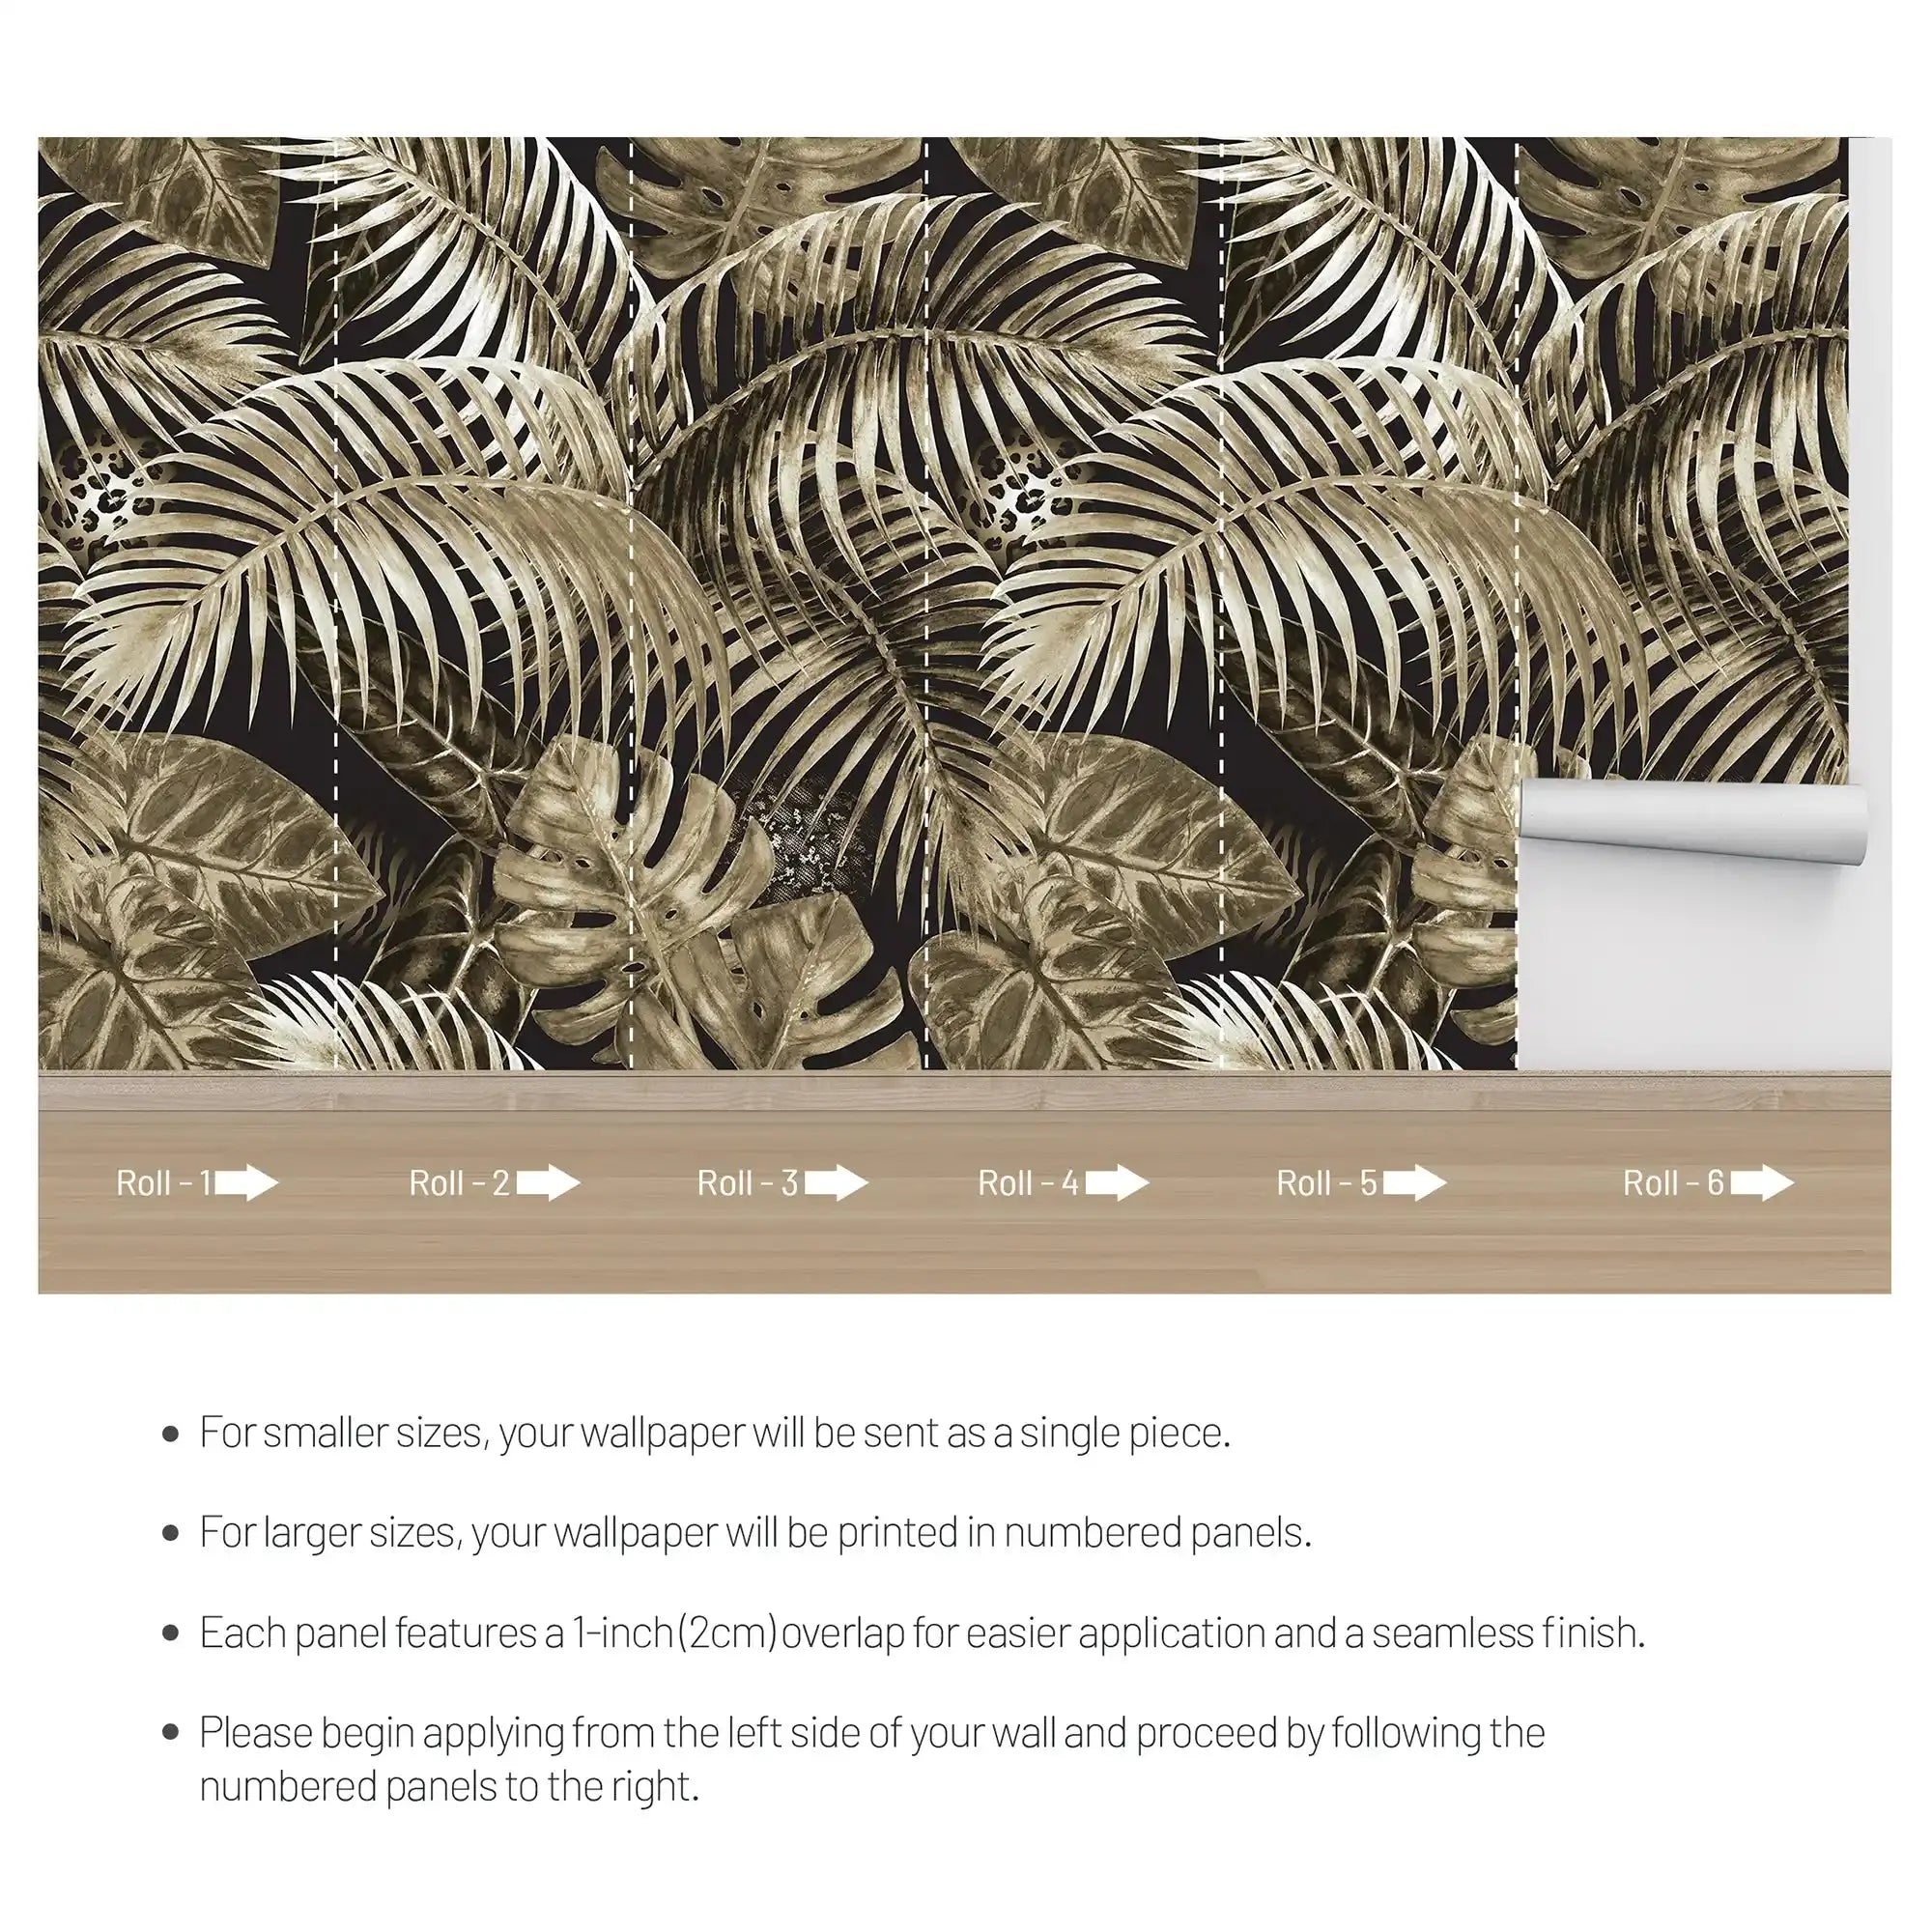 3096-D / Jungle Leaves Wallpaper - Tropical Botanical Wall Decor - Self Adhesive, Peel and Stick - Modern and Contemporary - Artevella